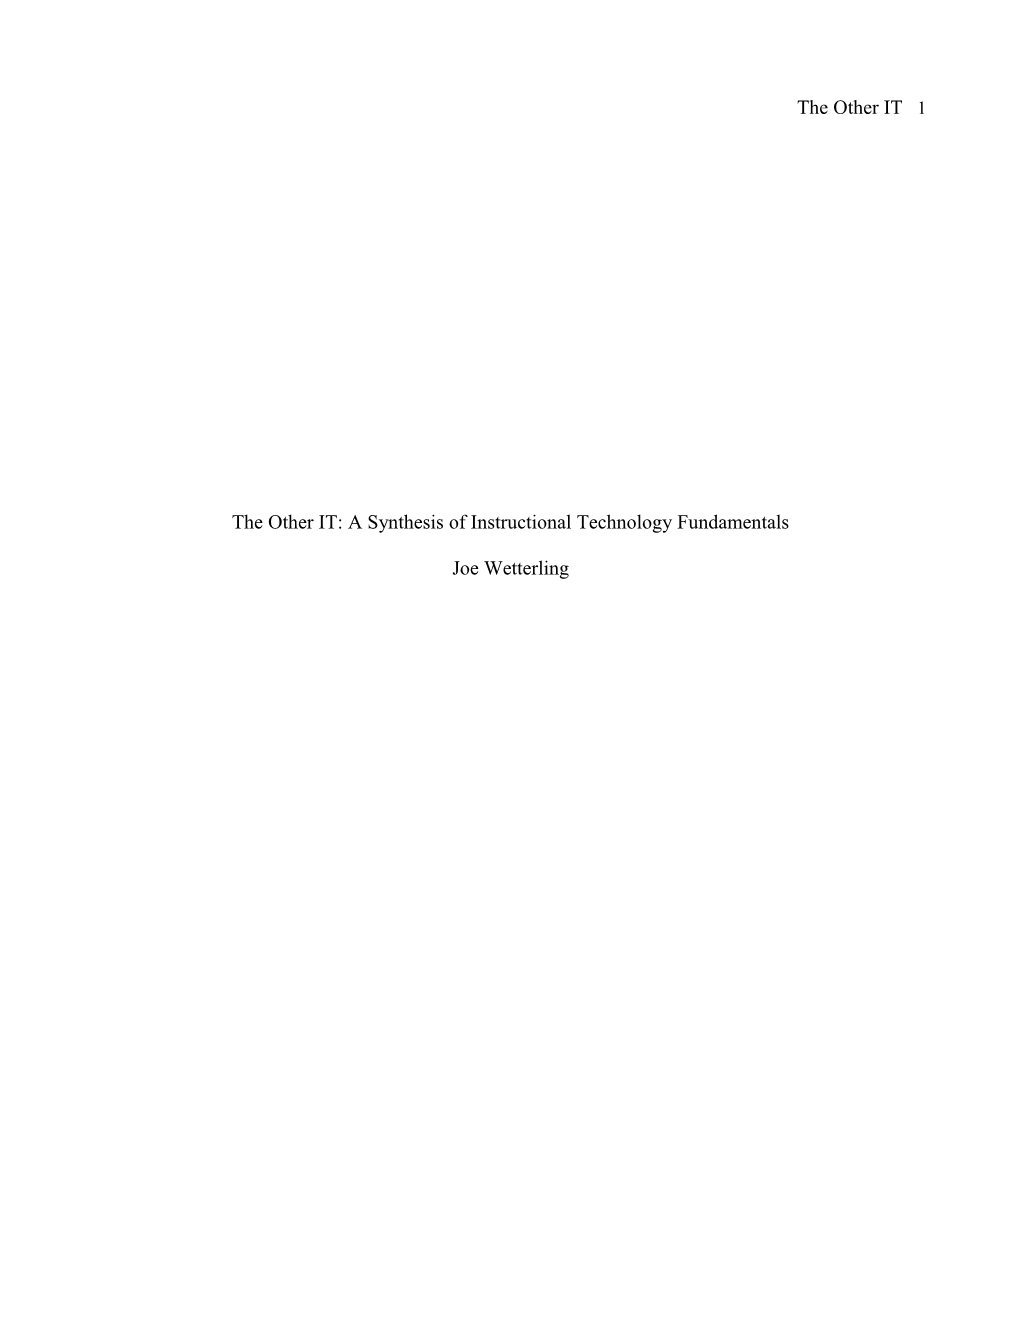 The Other IT: a Synthesis of Instructional Technology Fundamentals